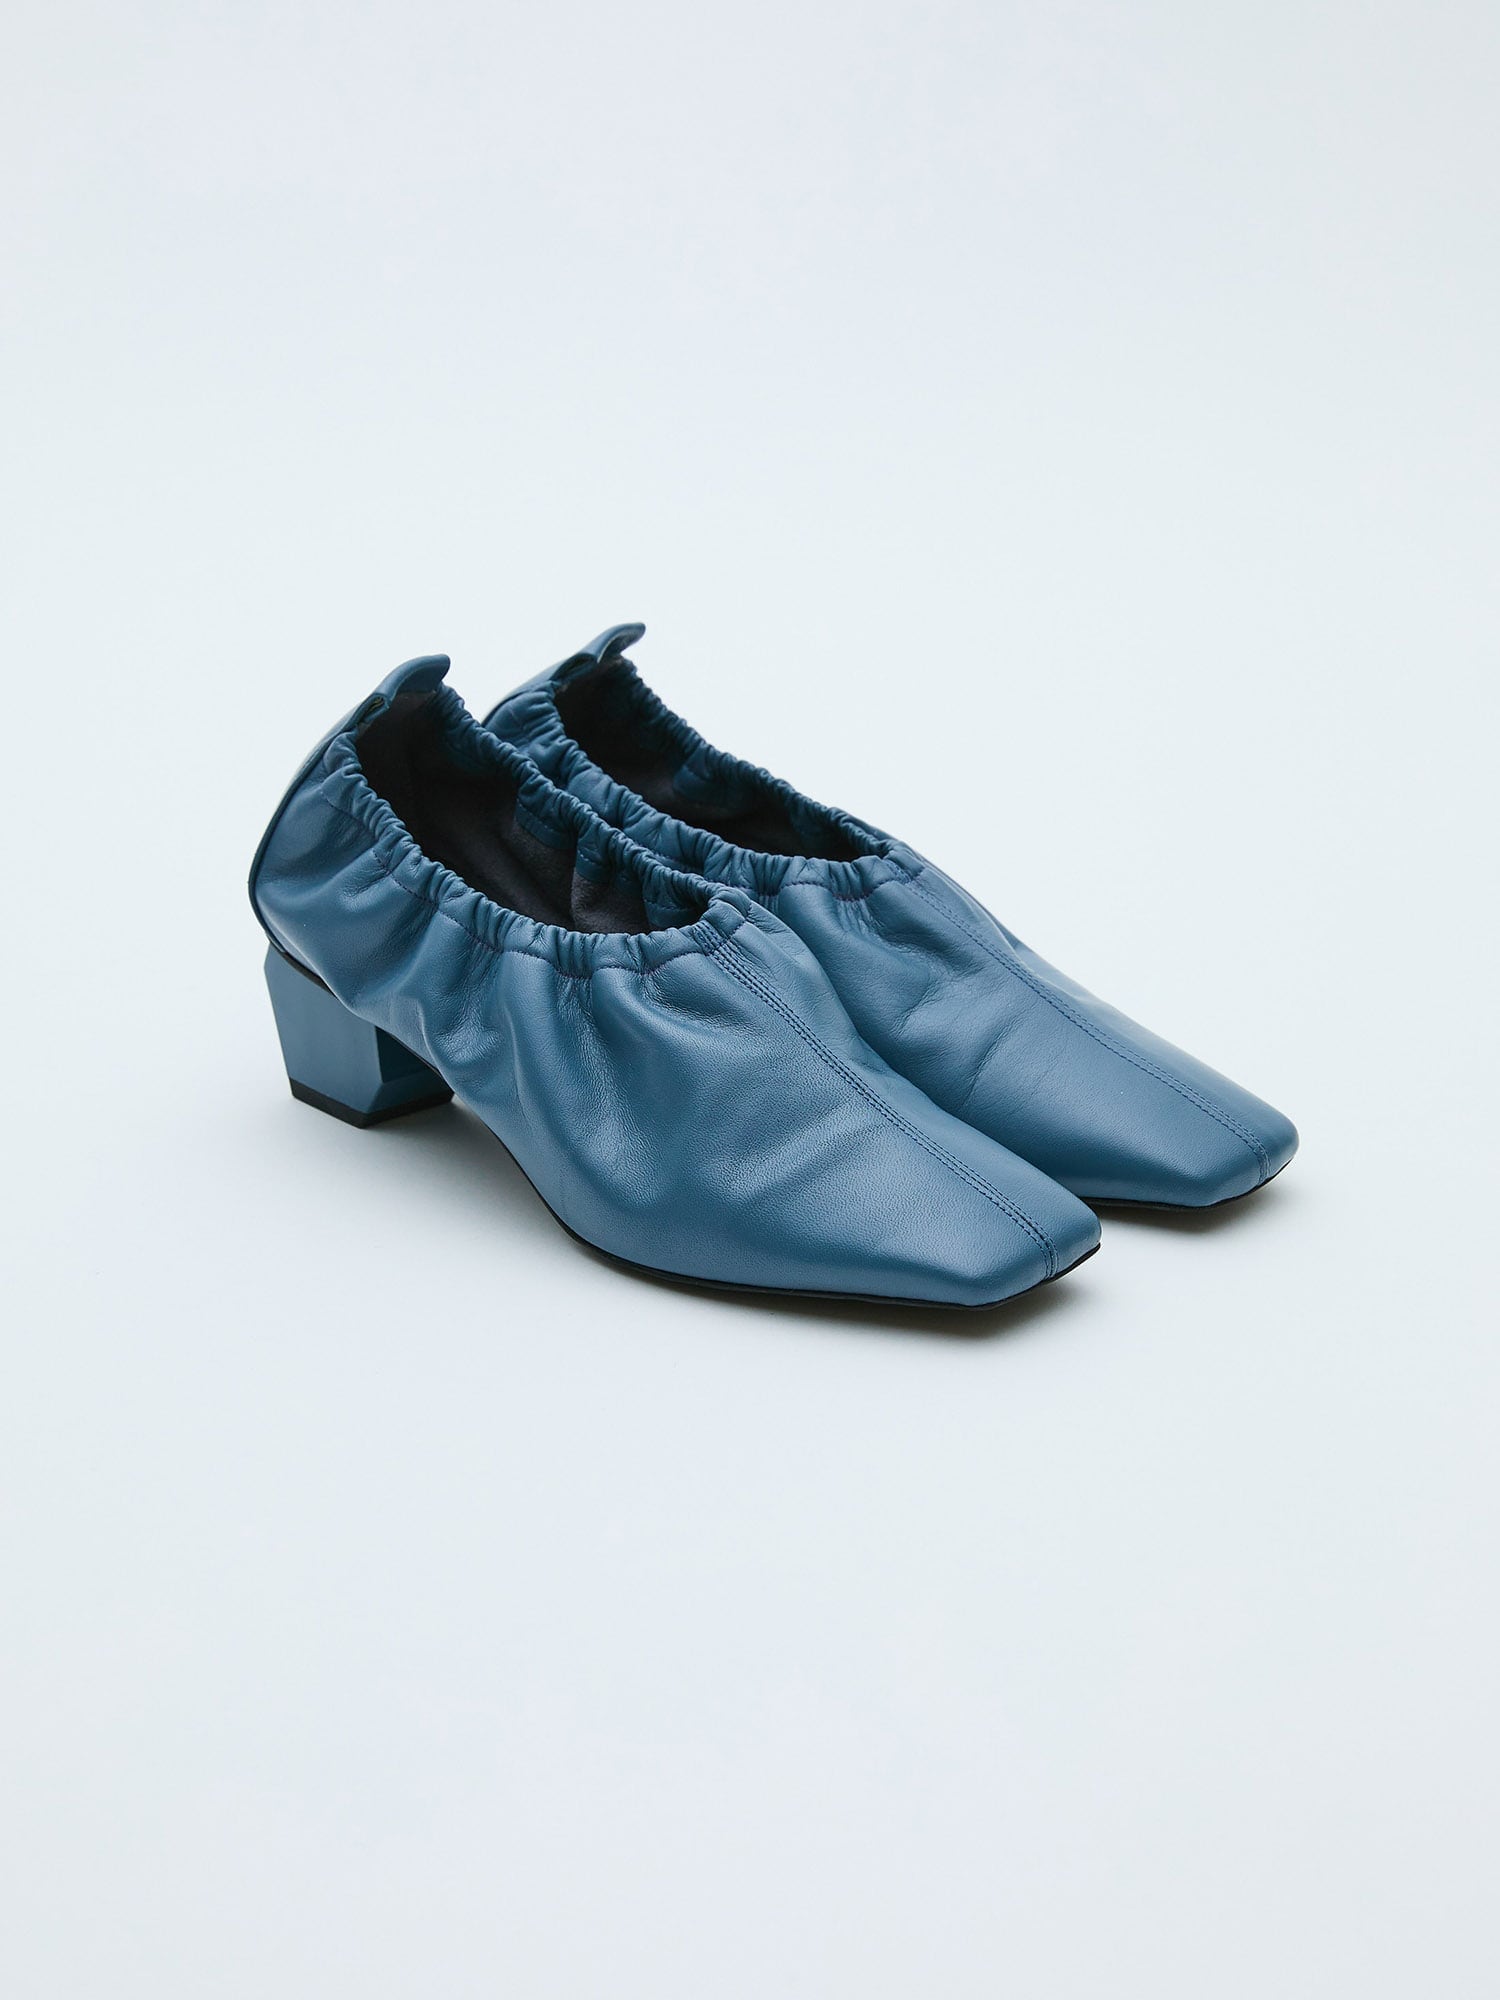 SHOES COLLECTION｜UNITED TOKYO ONLINE STORE